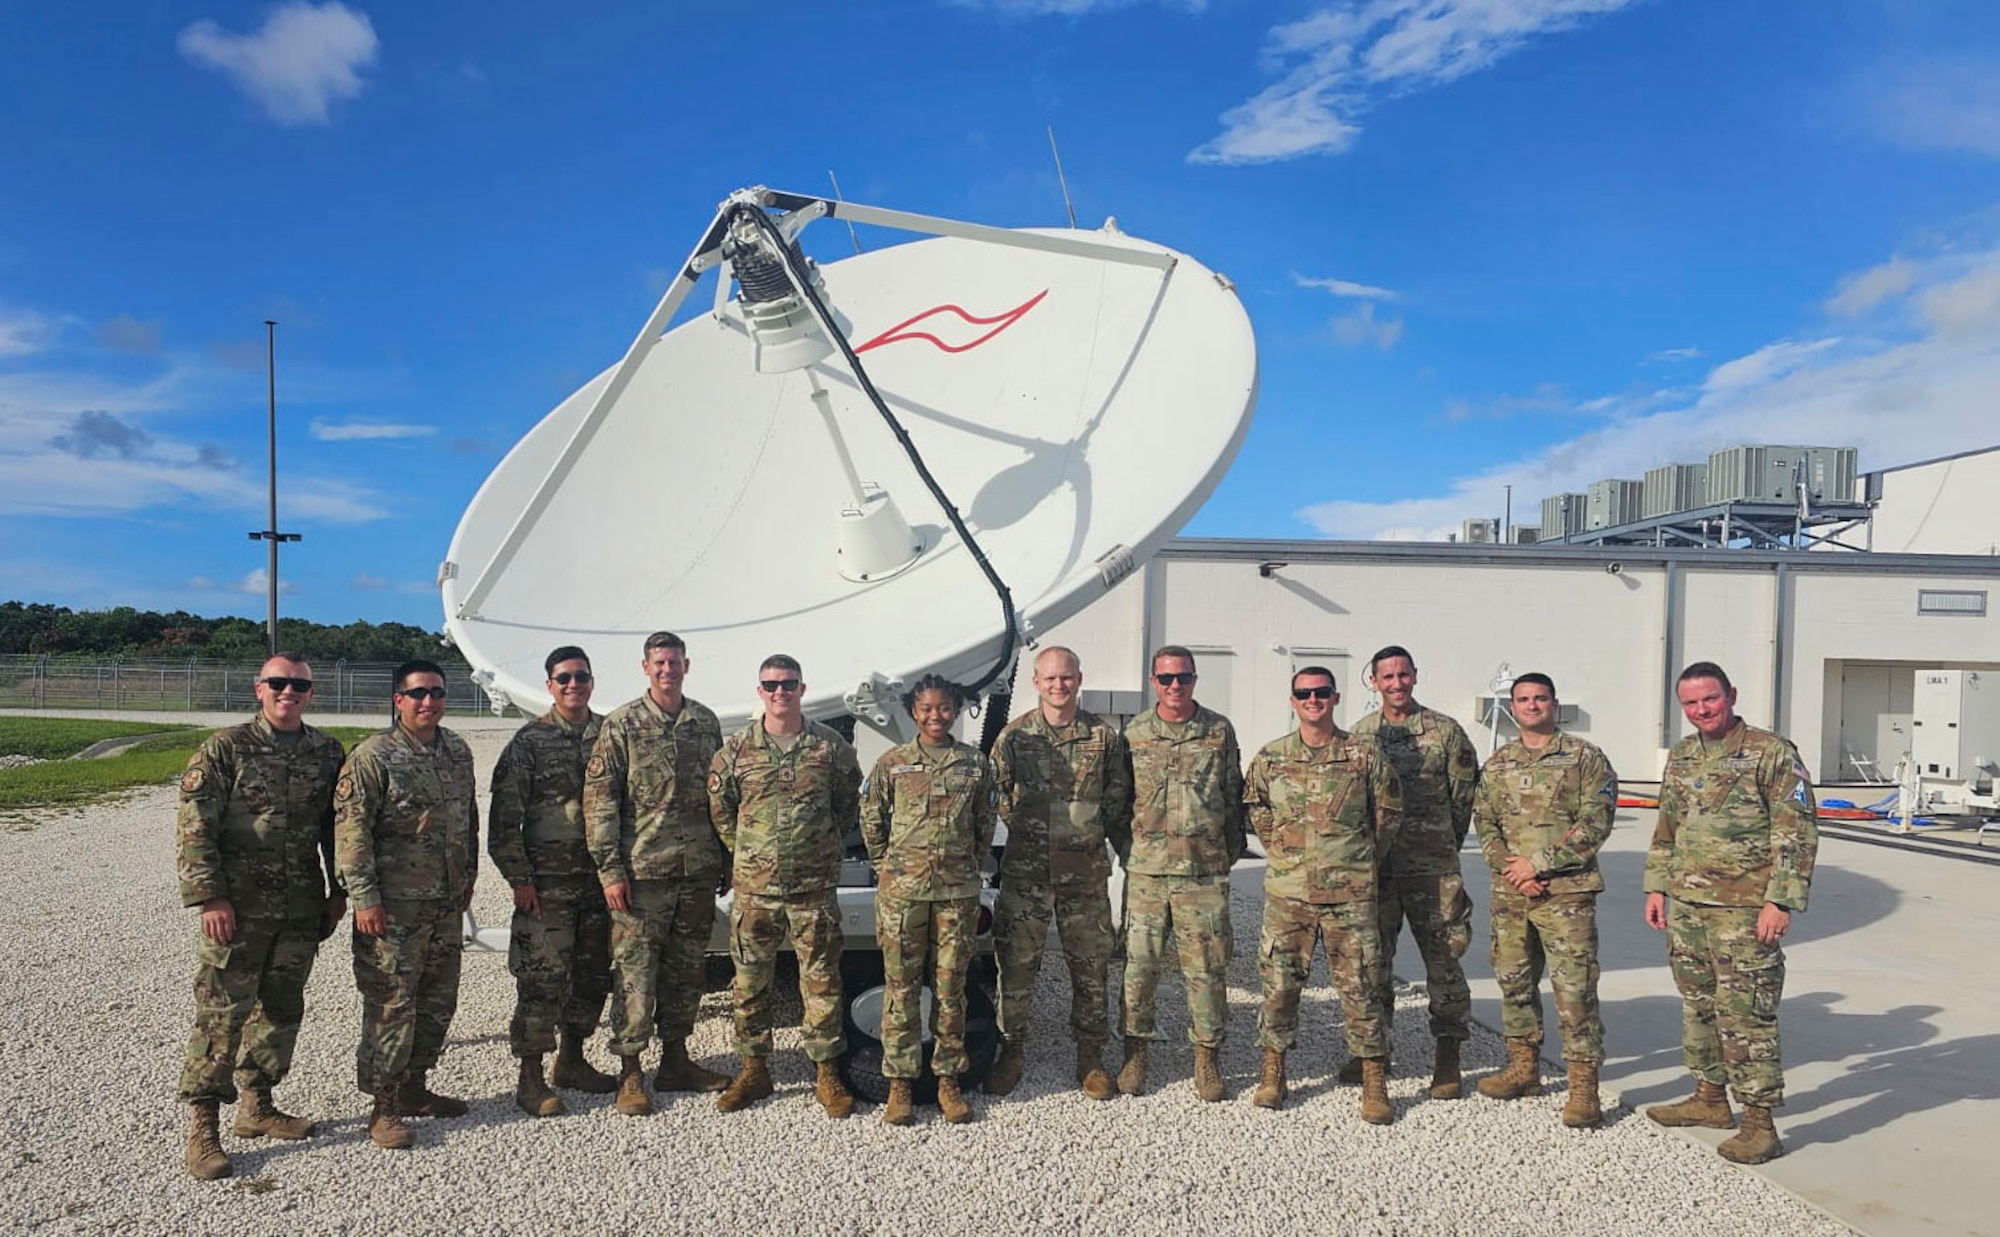 Members from the 114th Electromagnetic Warfare Squadron, 71st, 73rd, and 75th Intelligence, Surveillance, and Reconnaissance Squadrons, 392d Combat Training Squadron, and 379th Space Range Squadron, pose for a group photo during BLACK SKIES 23-3 at Cape Canaveral Space Force Station, Sept. 21, 2023. The BLACK SKIES exercise series focuses on tactical Space Electromagnetic Warfare. (Courtesy photo)